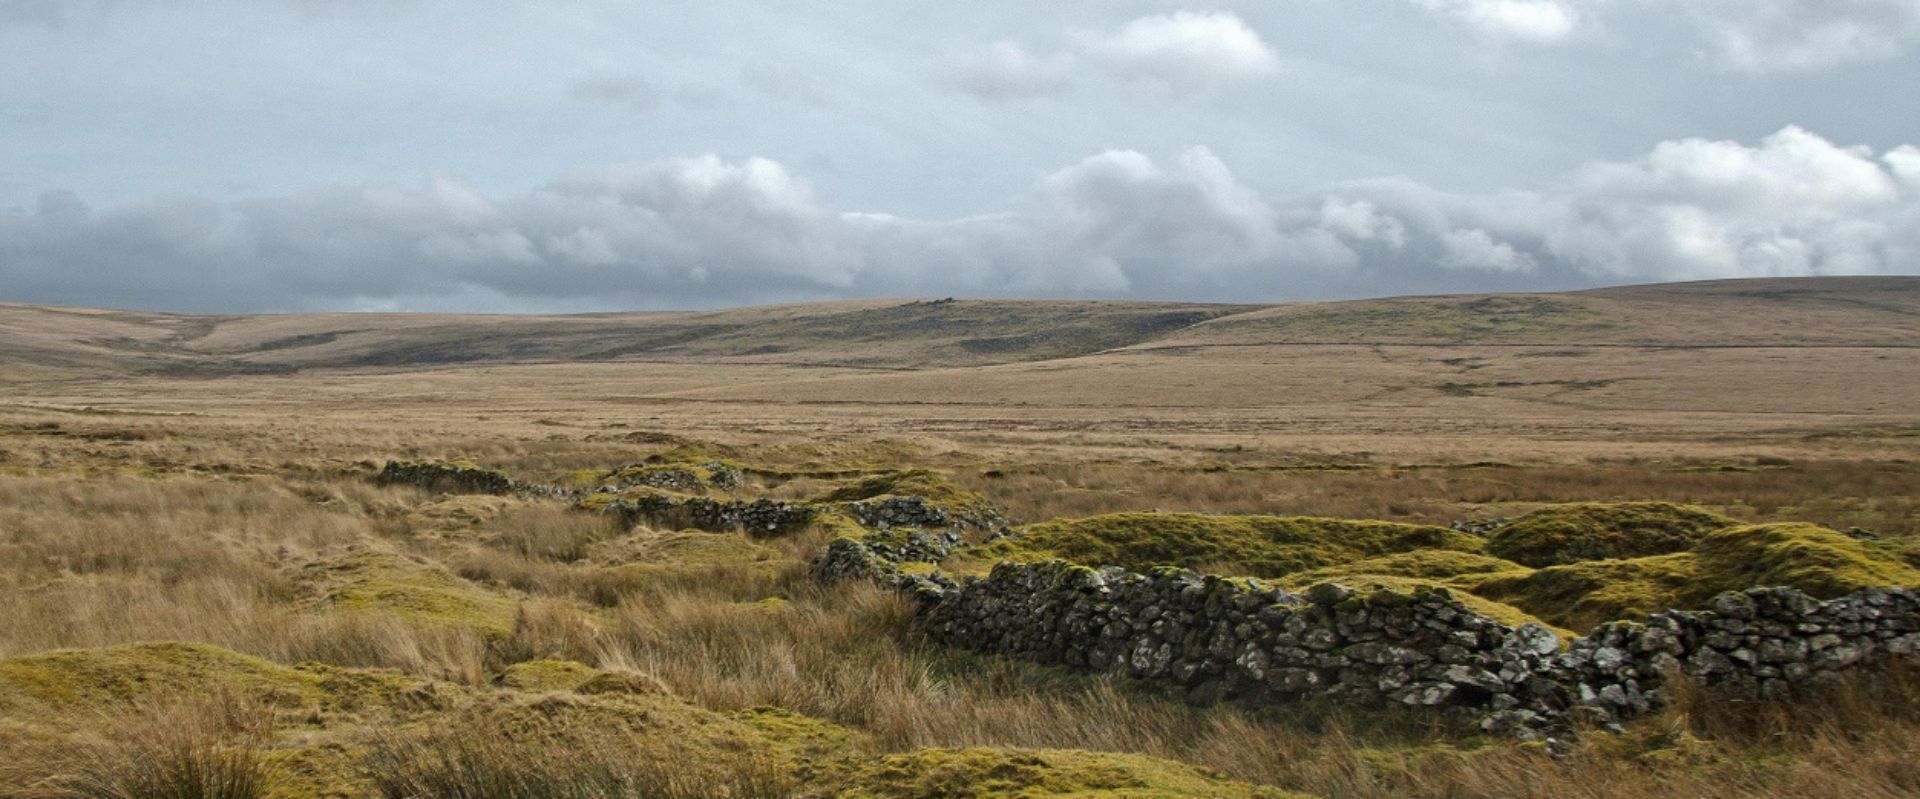 Fox Tor Mire, or Grimpen Mire in the great story!